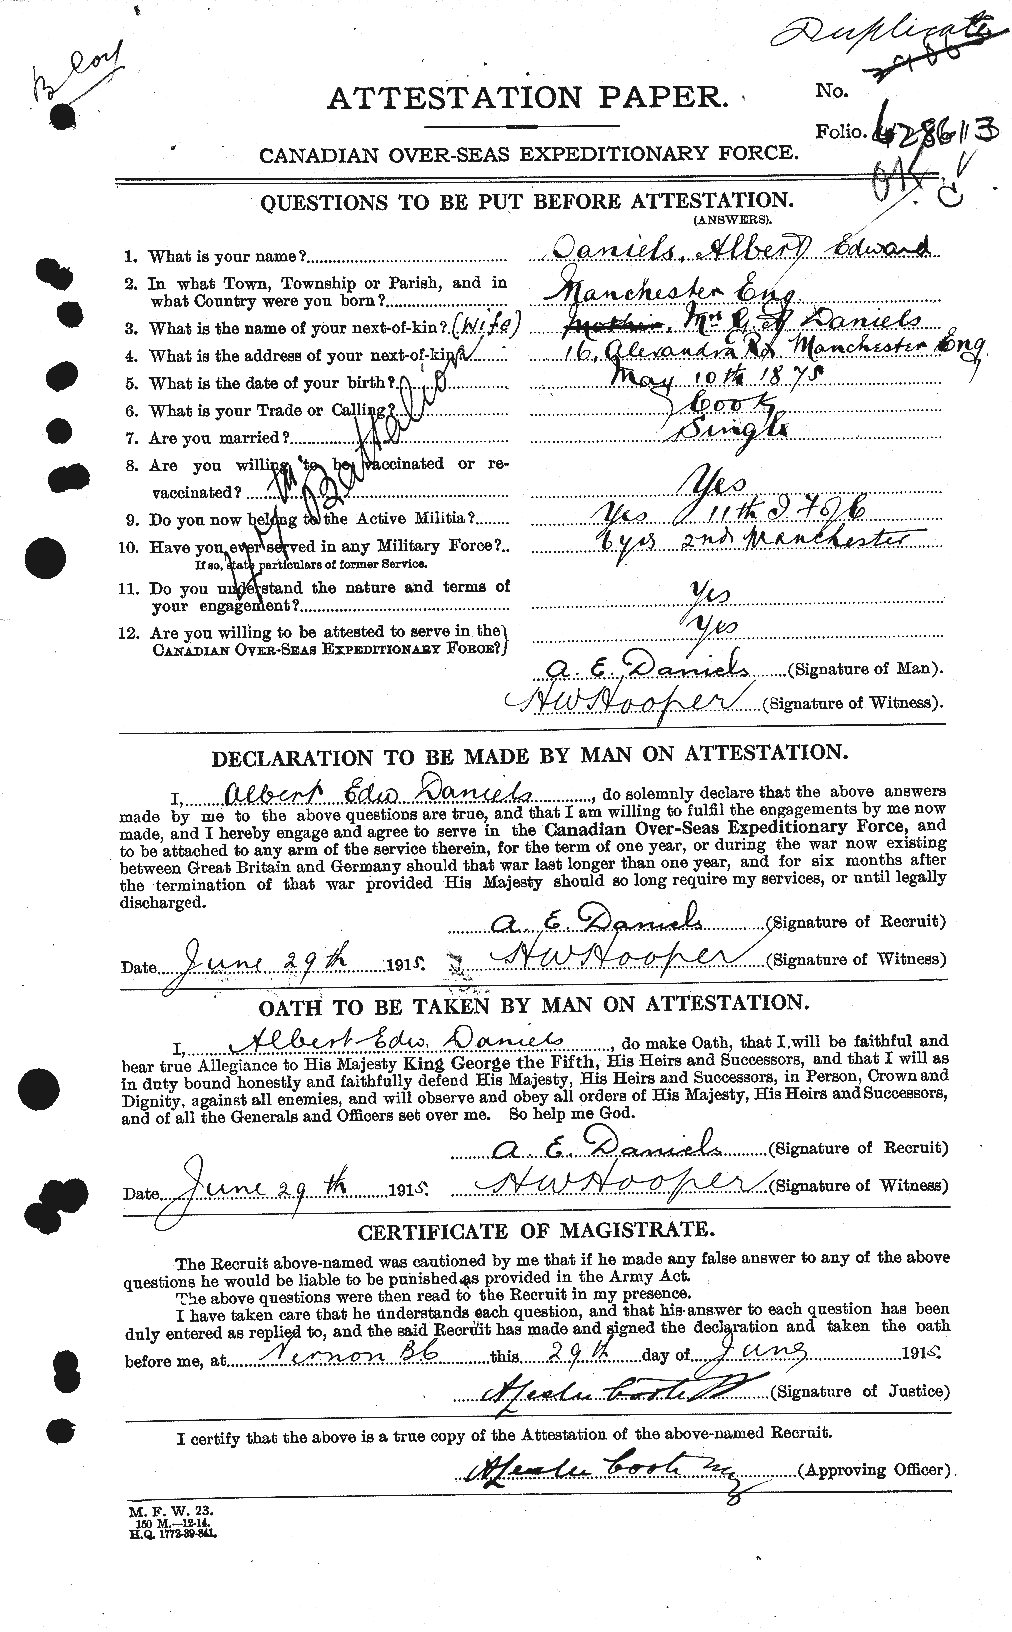 Personnel Records of the First World War - CEF 279558a